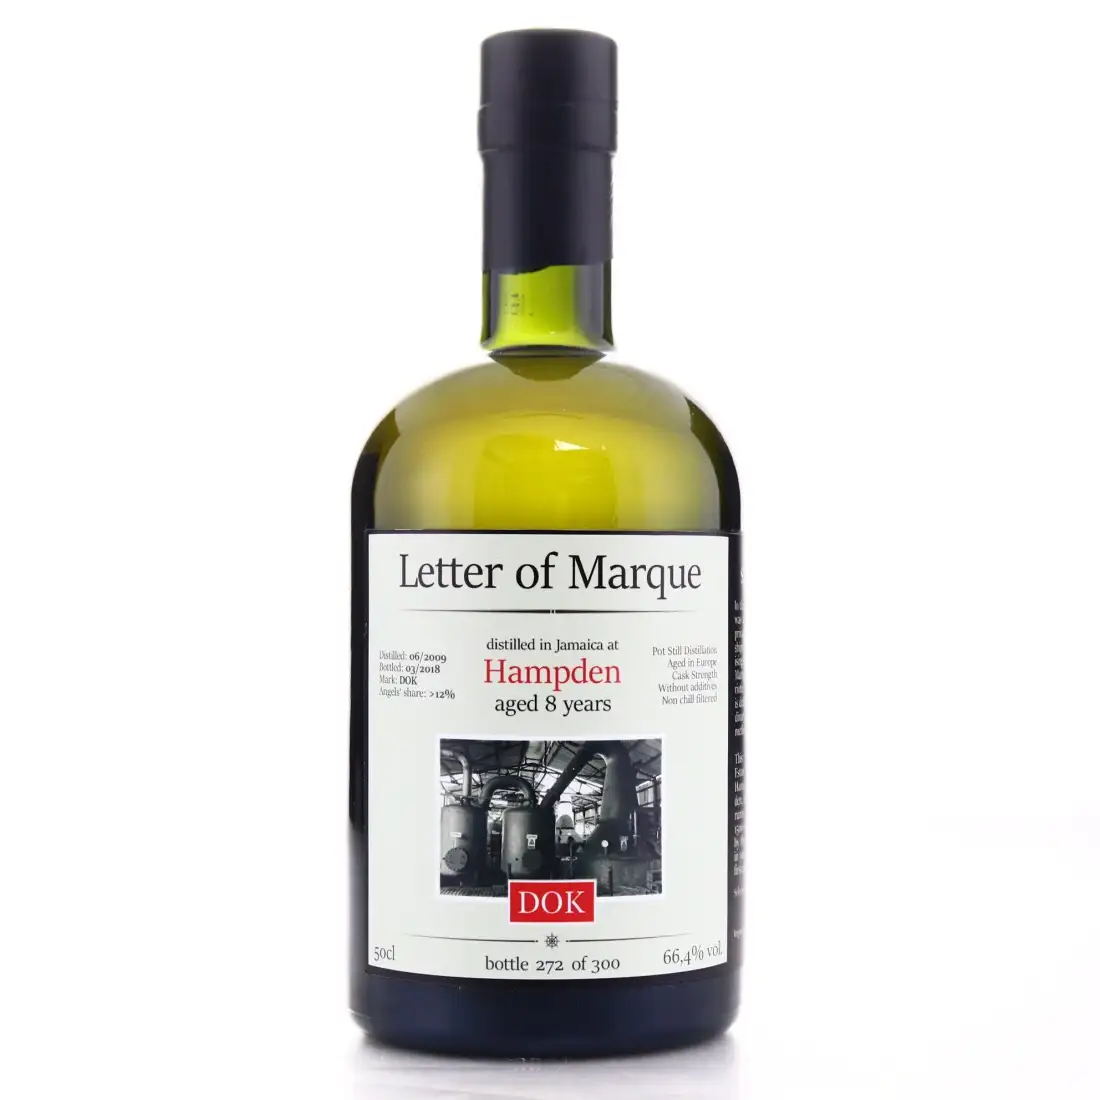 Image of the front of the bottle of the rum Letter of Marque DOK